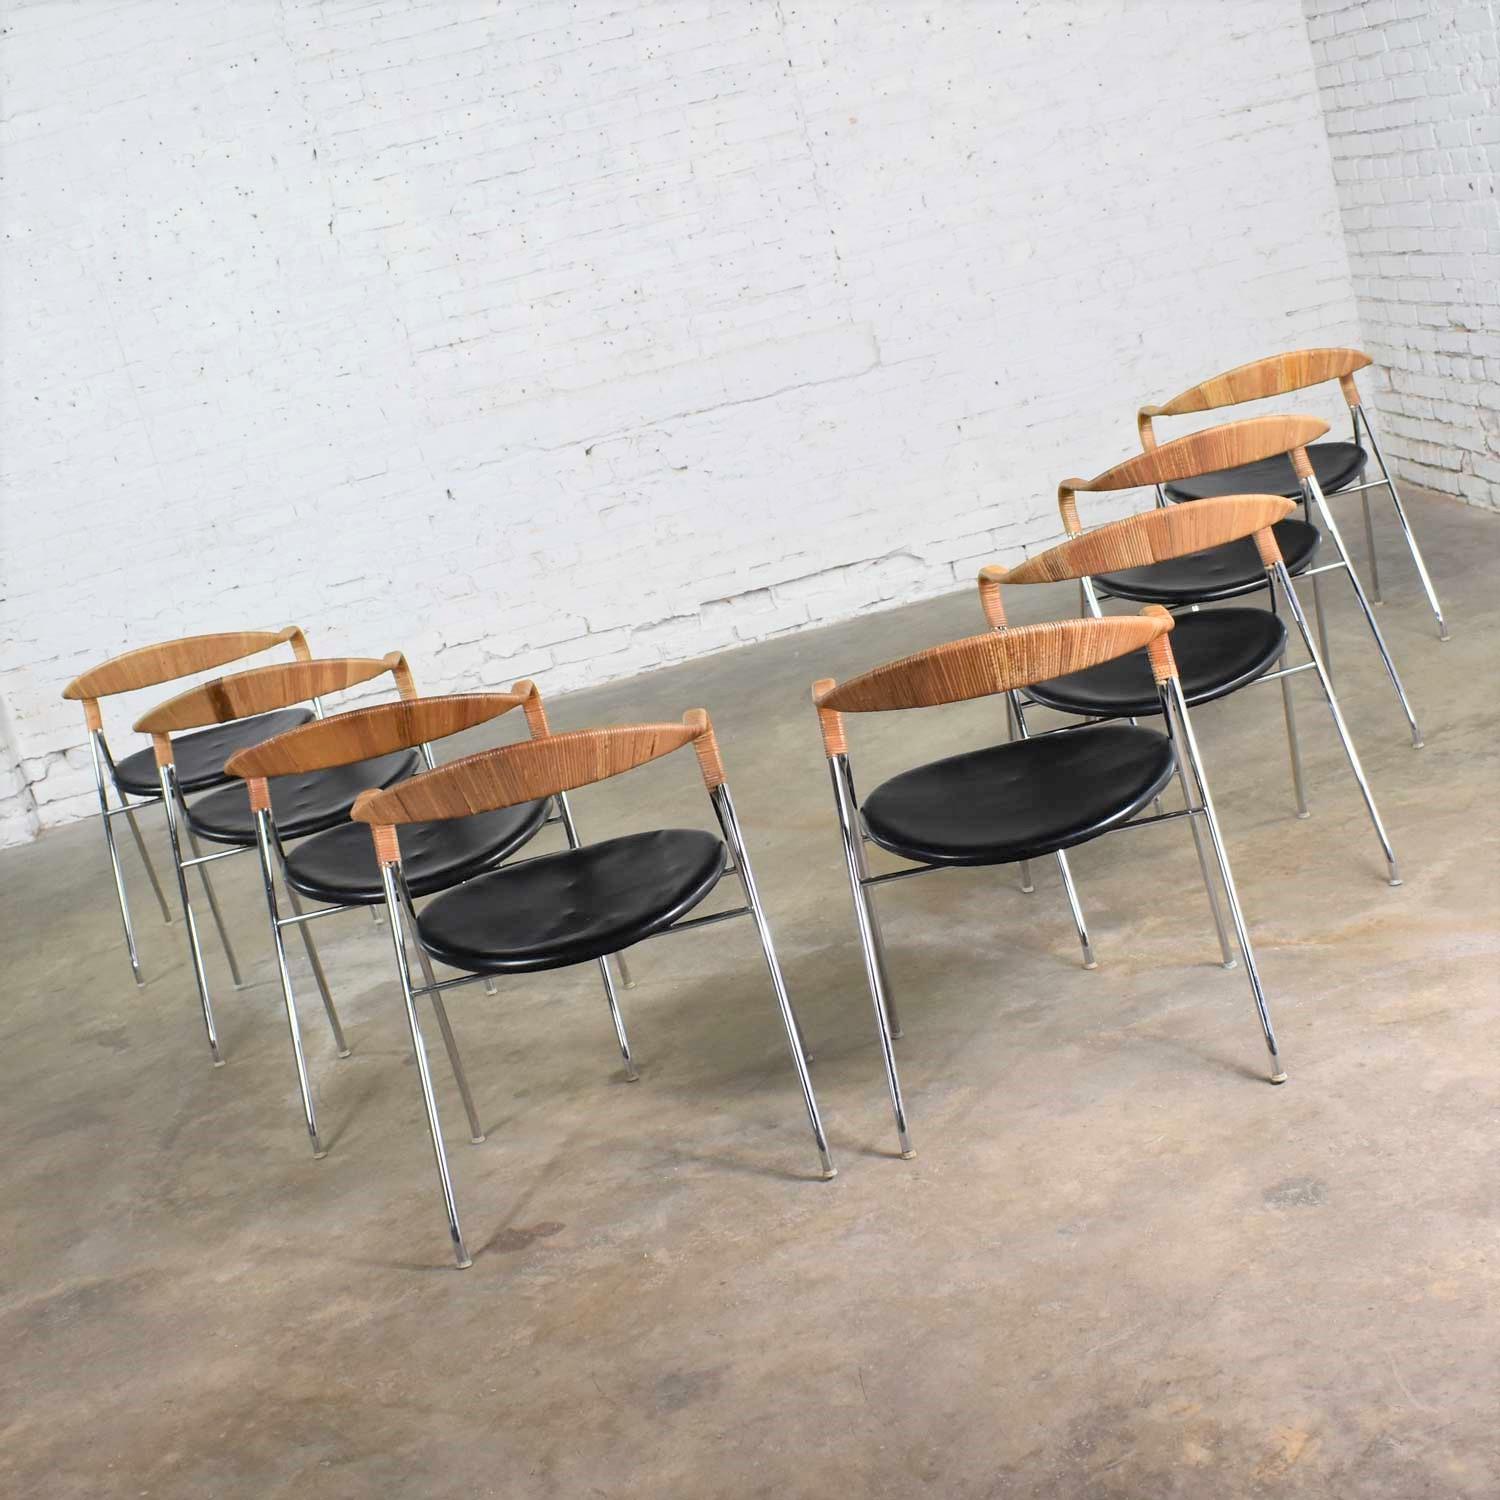 Incredible set of eight (8) Saffa chrome steel, wicker, and black vinyl faux leather dining chairs designed by Hans Eichenberger, produced by Dietiker, and distributed in the U.S. by Stendig. They are in wonderful original vintage condition. Some